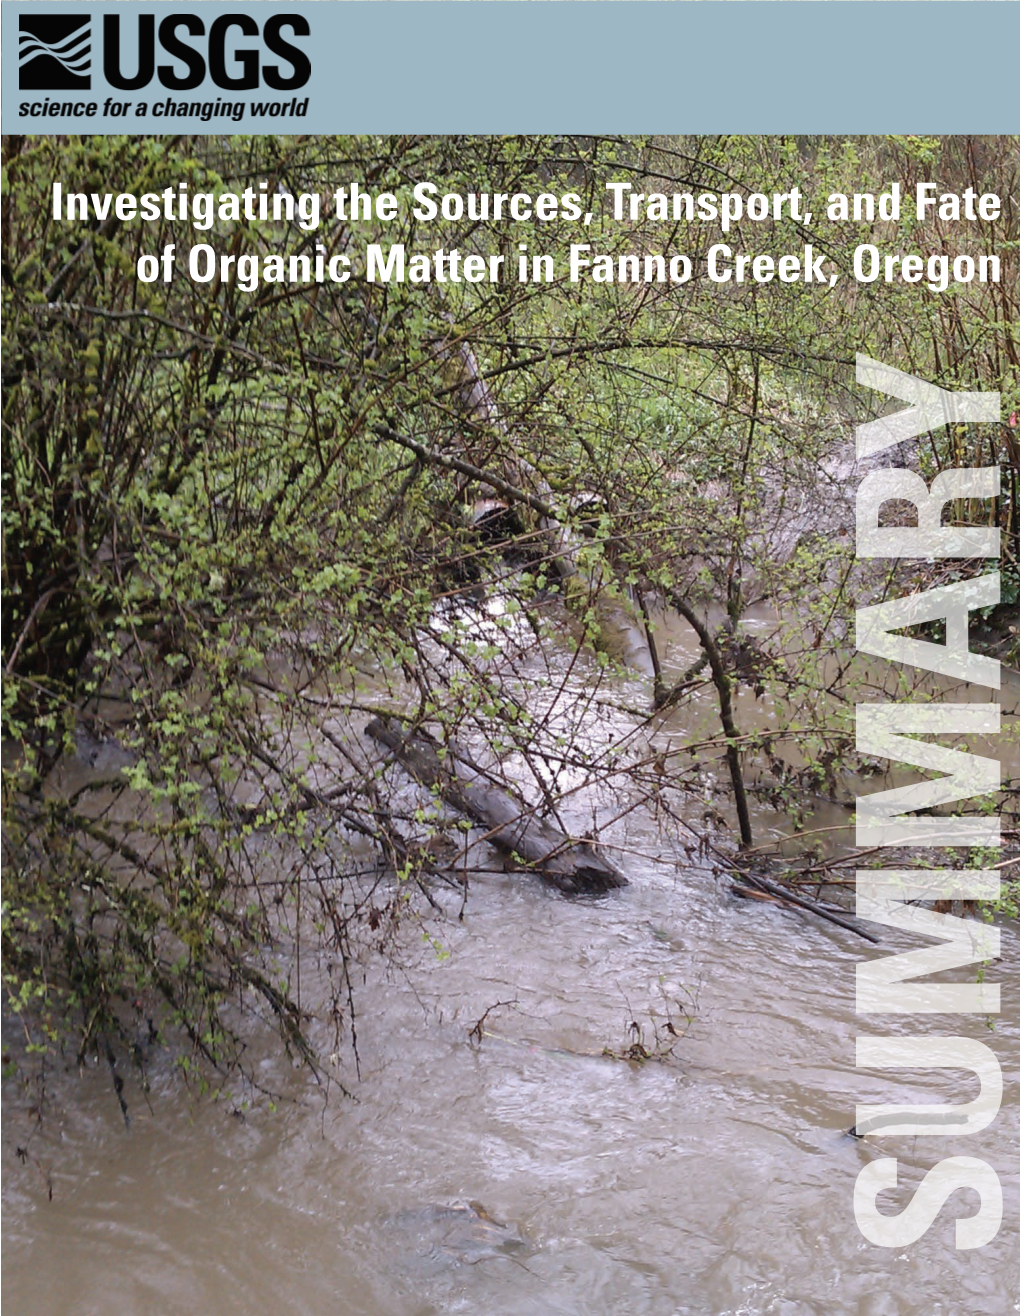 Investigating the Sources, Transport, and Fate of Organic Matter in Fanno Creek, Oregon SUMMARY